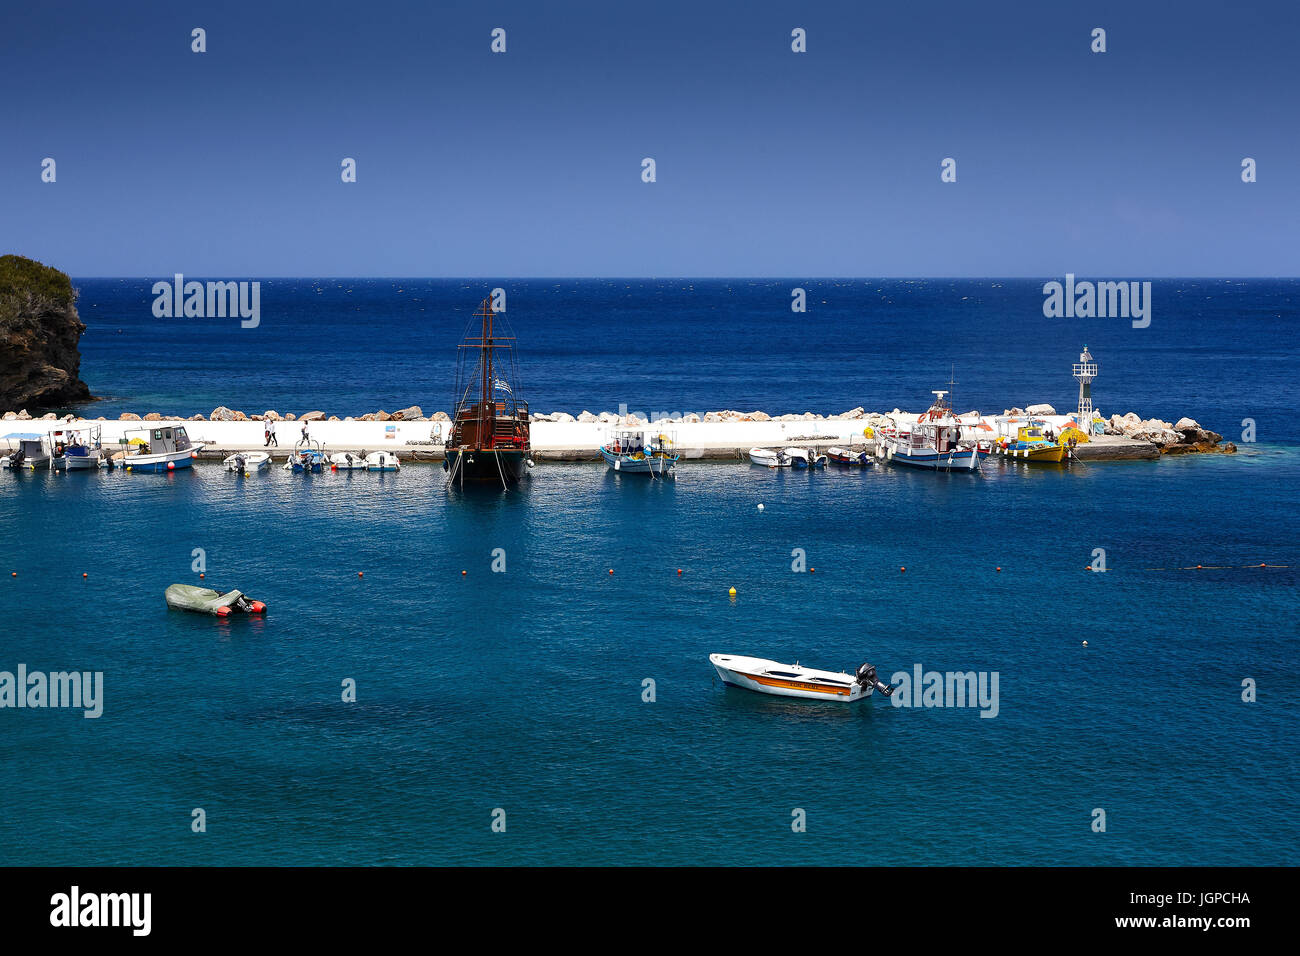 View at the harbour in Bali, Crete Island, Greece Stock Photo